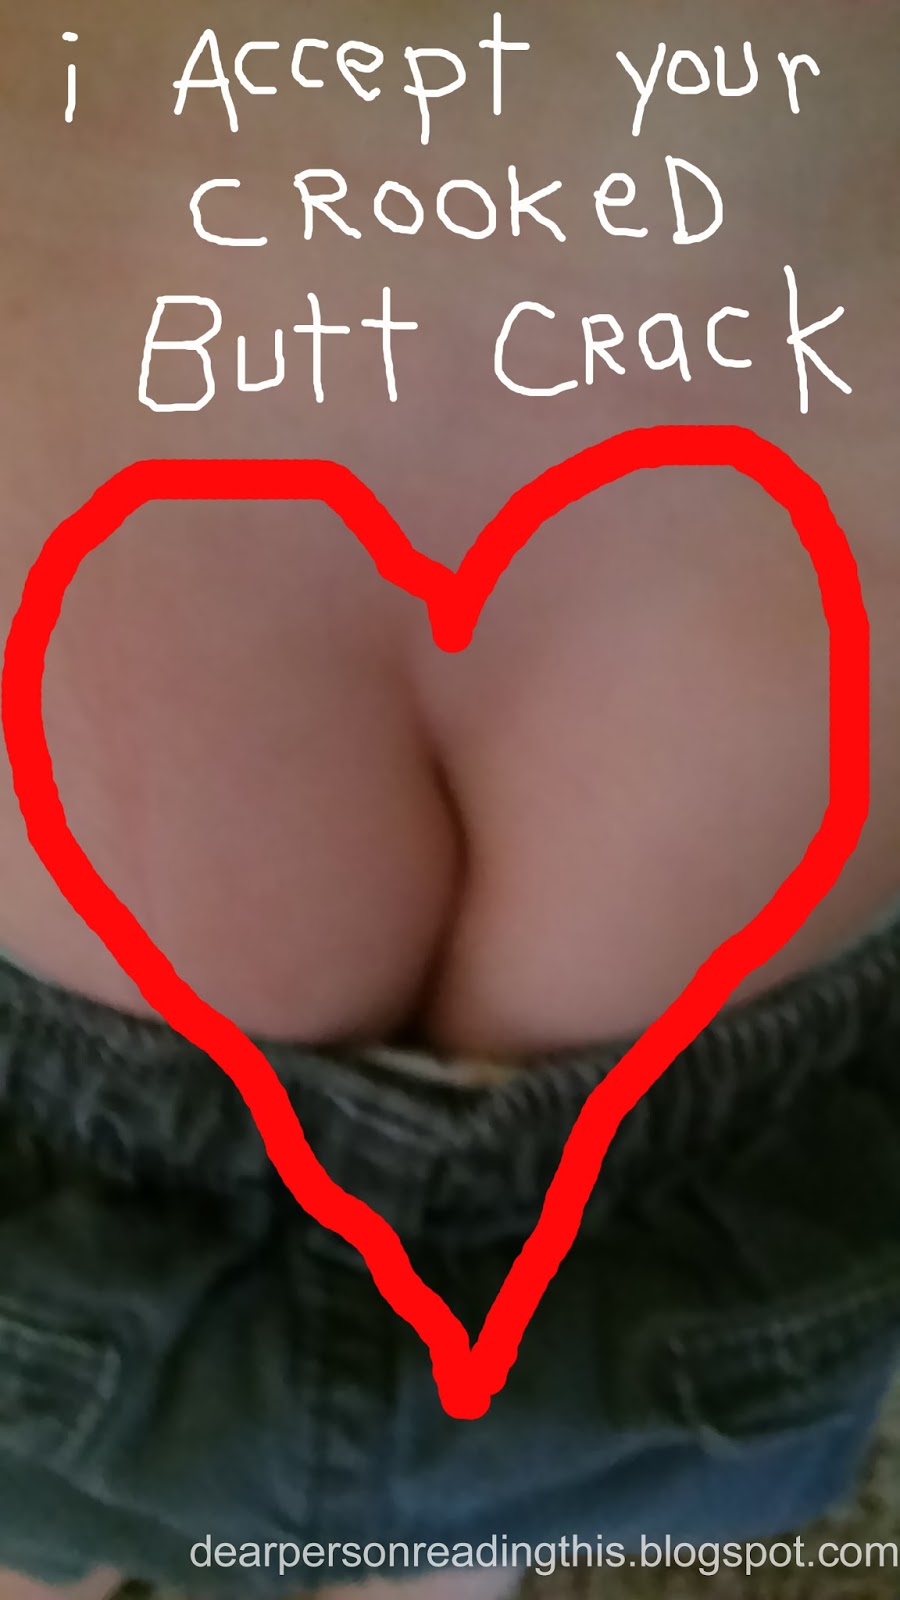 Crooked buttcrack